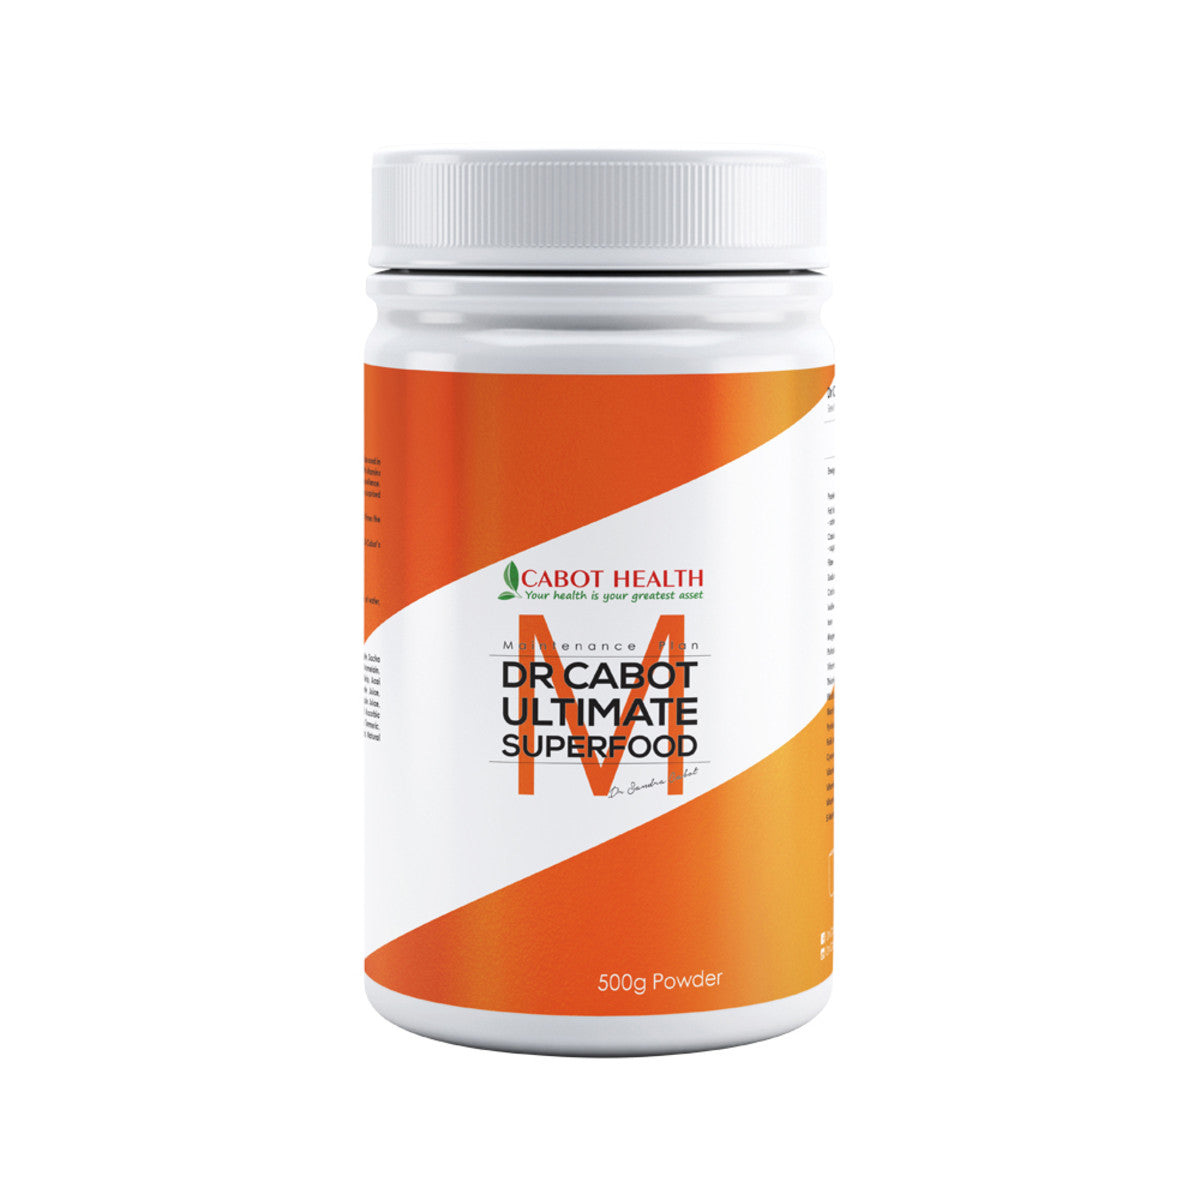 Cabot Health - Dr Cabot Ultimate Superfood